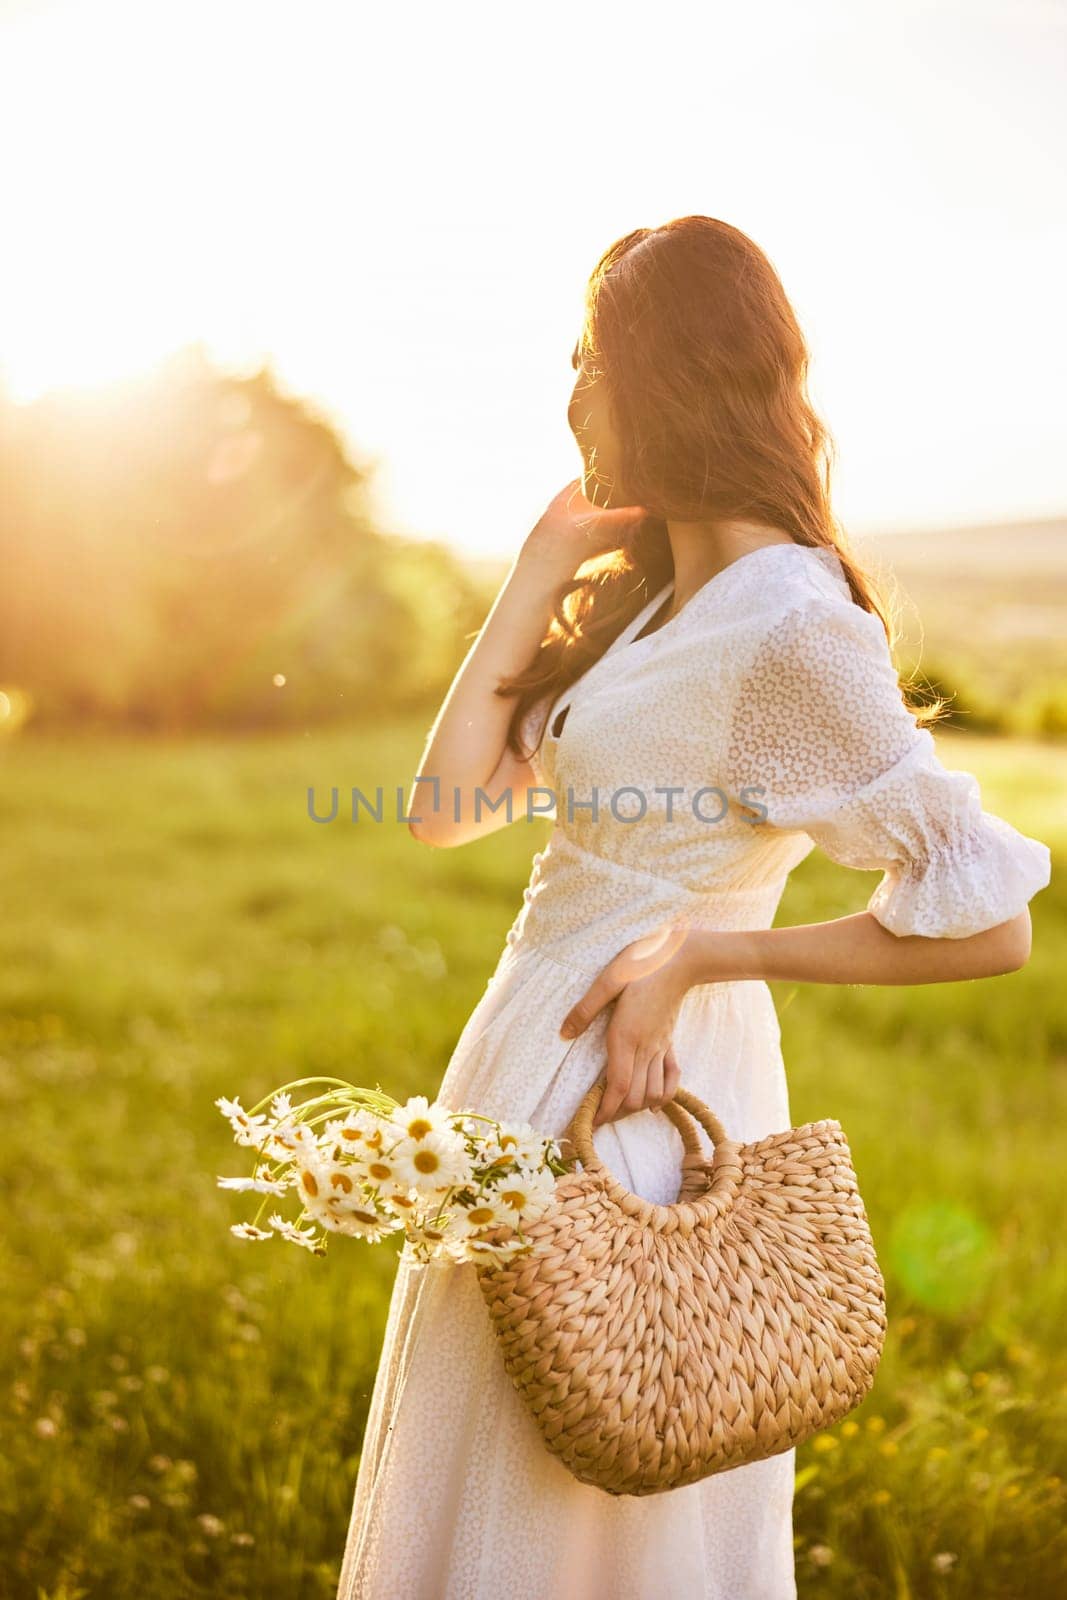 girl in a light summer dress with a basket of flowers in her hands with glare from the setting sun by Vichizh